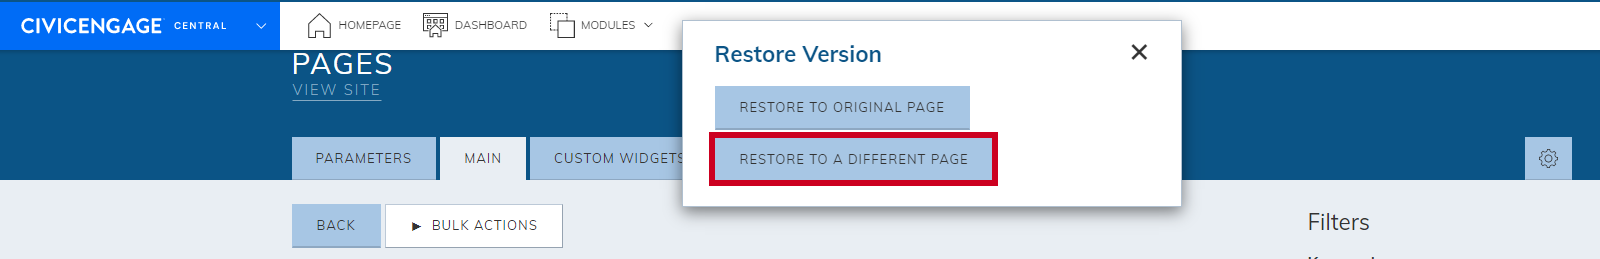 select restore to diff page